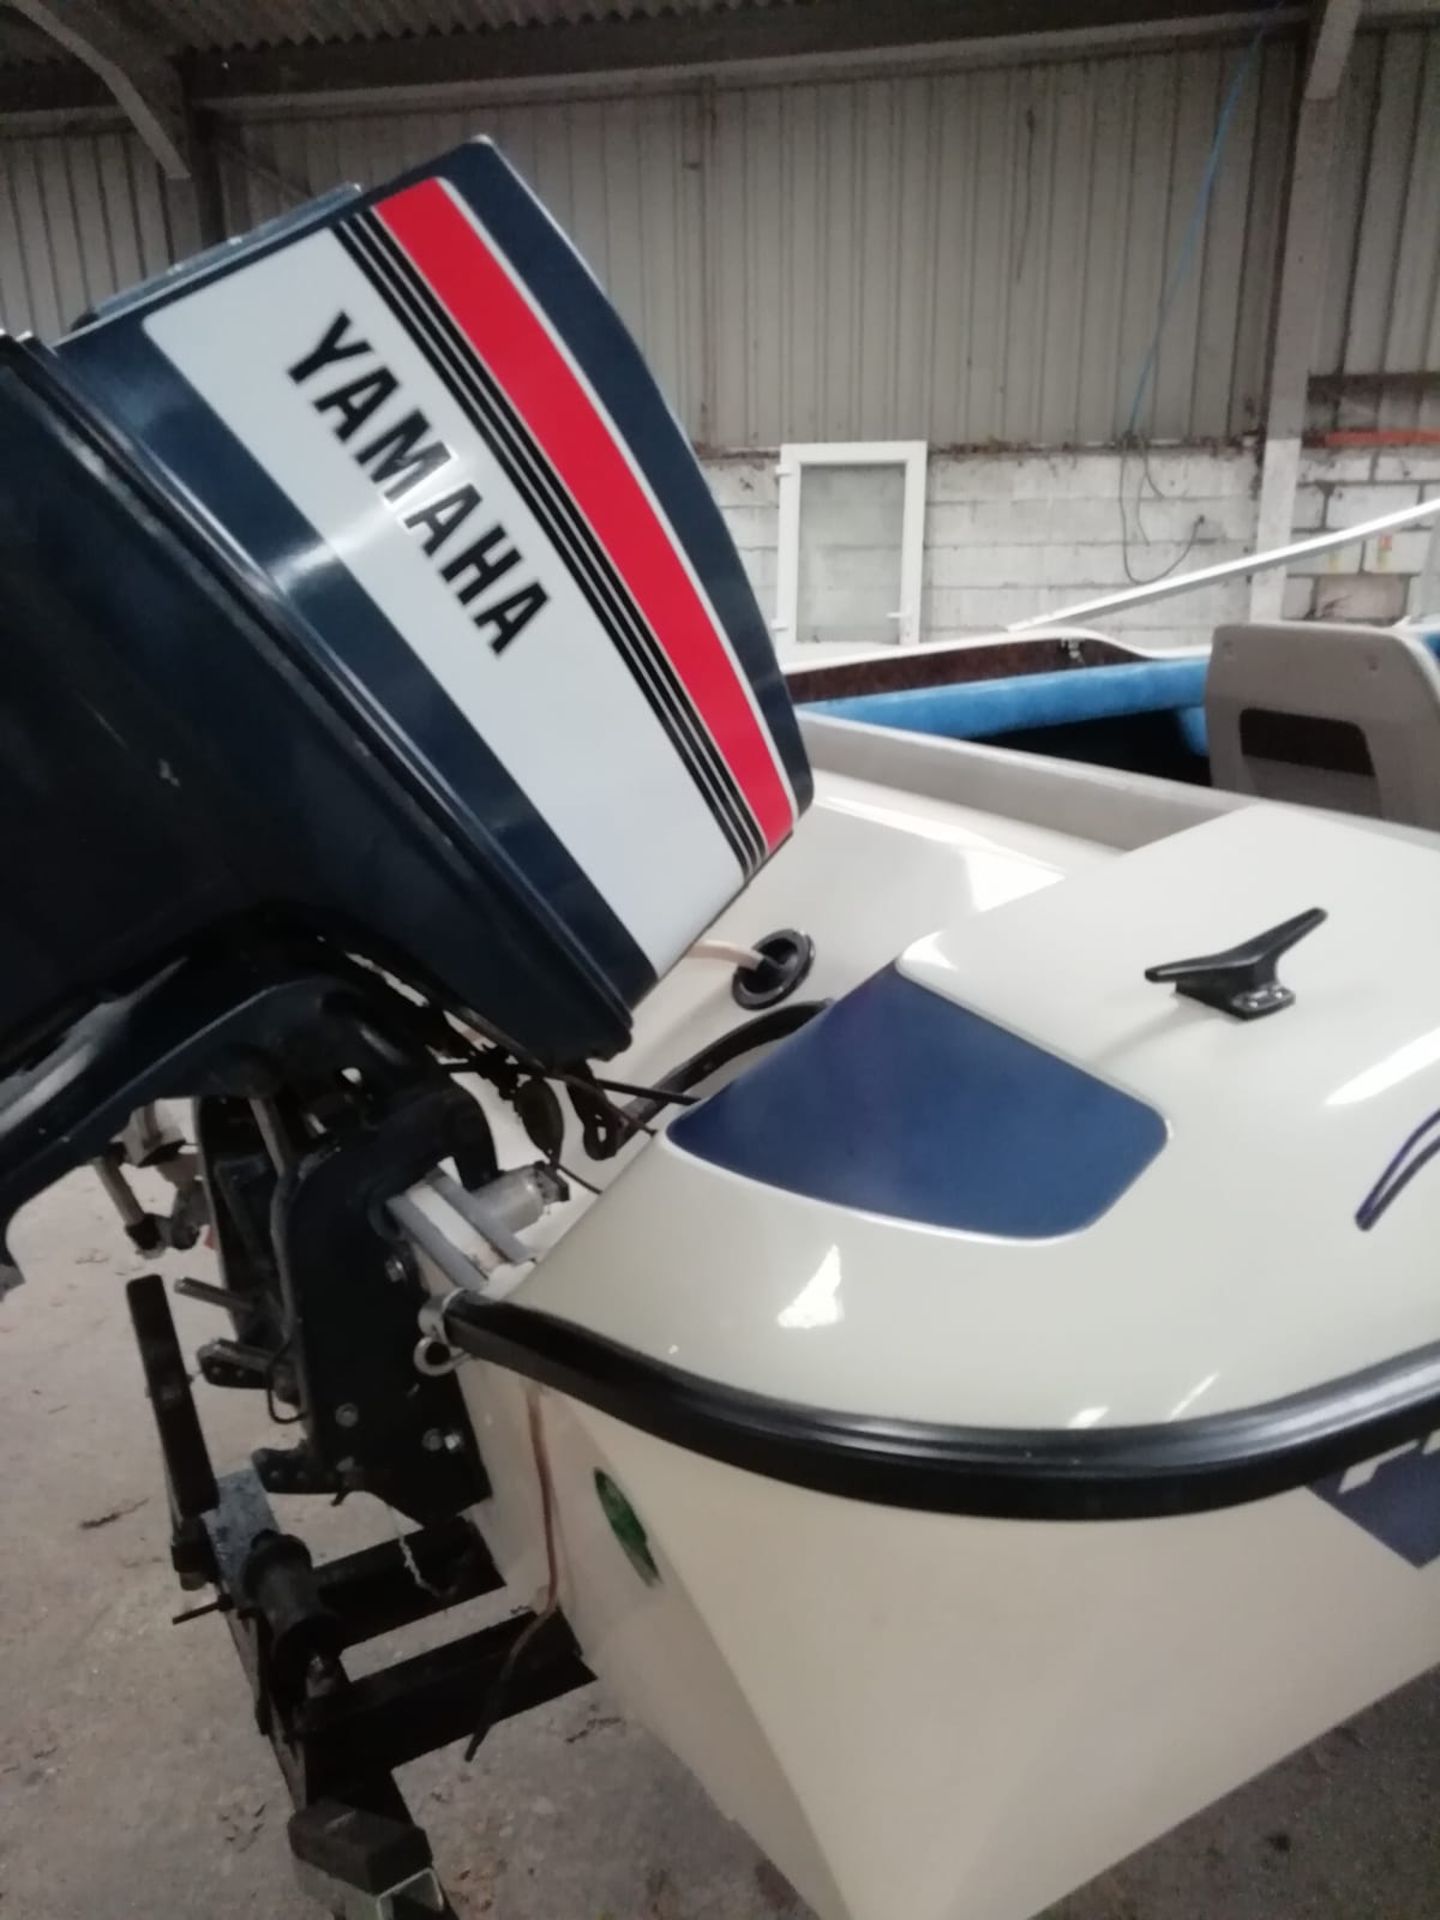 FLETCHER 150 ARROWSPORT SPEED BOAT WITH 85 HP YAMAHA ELECTRIC START - Image 8 of 11